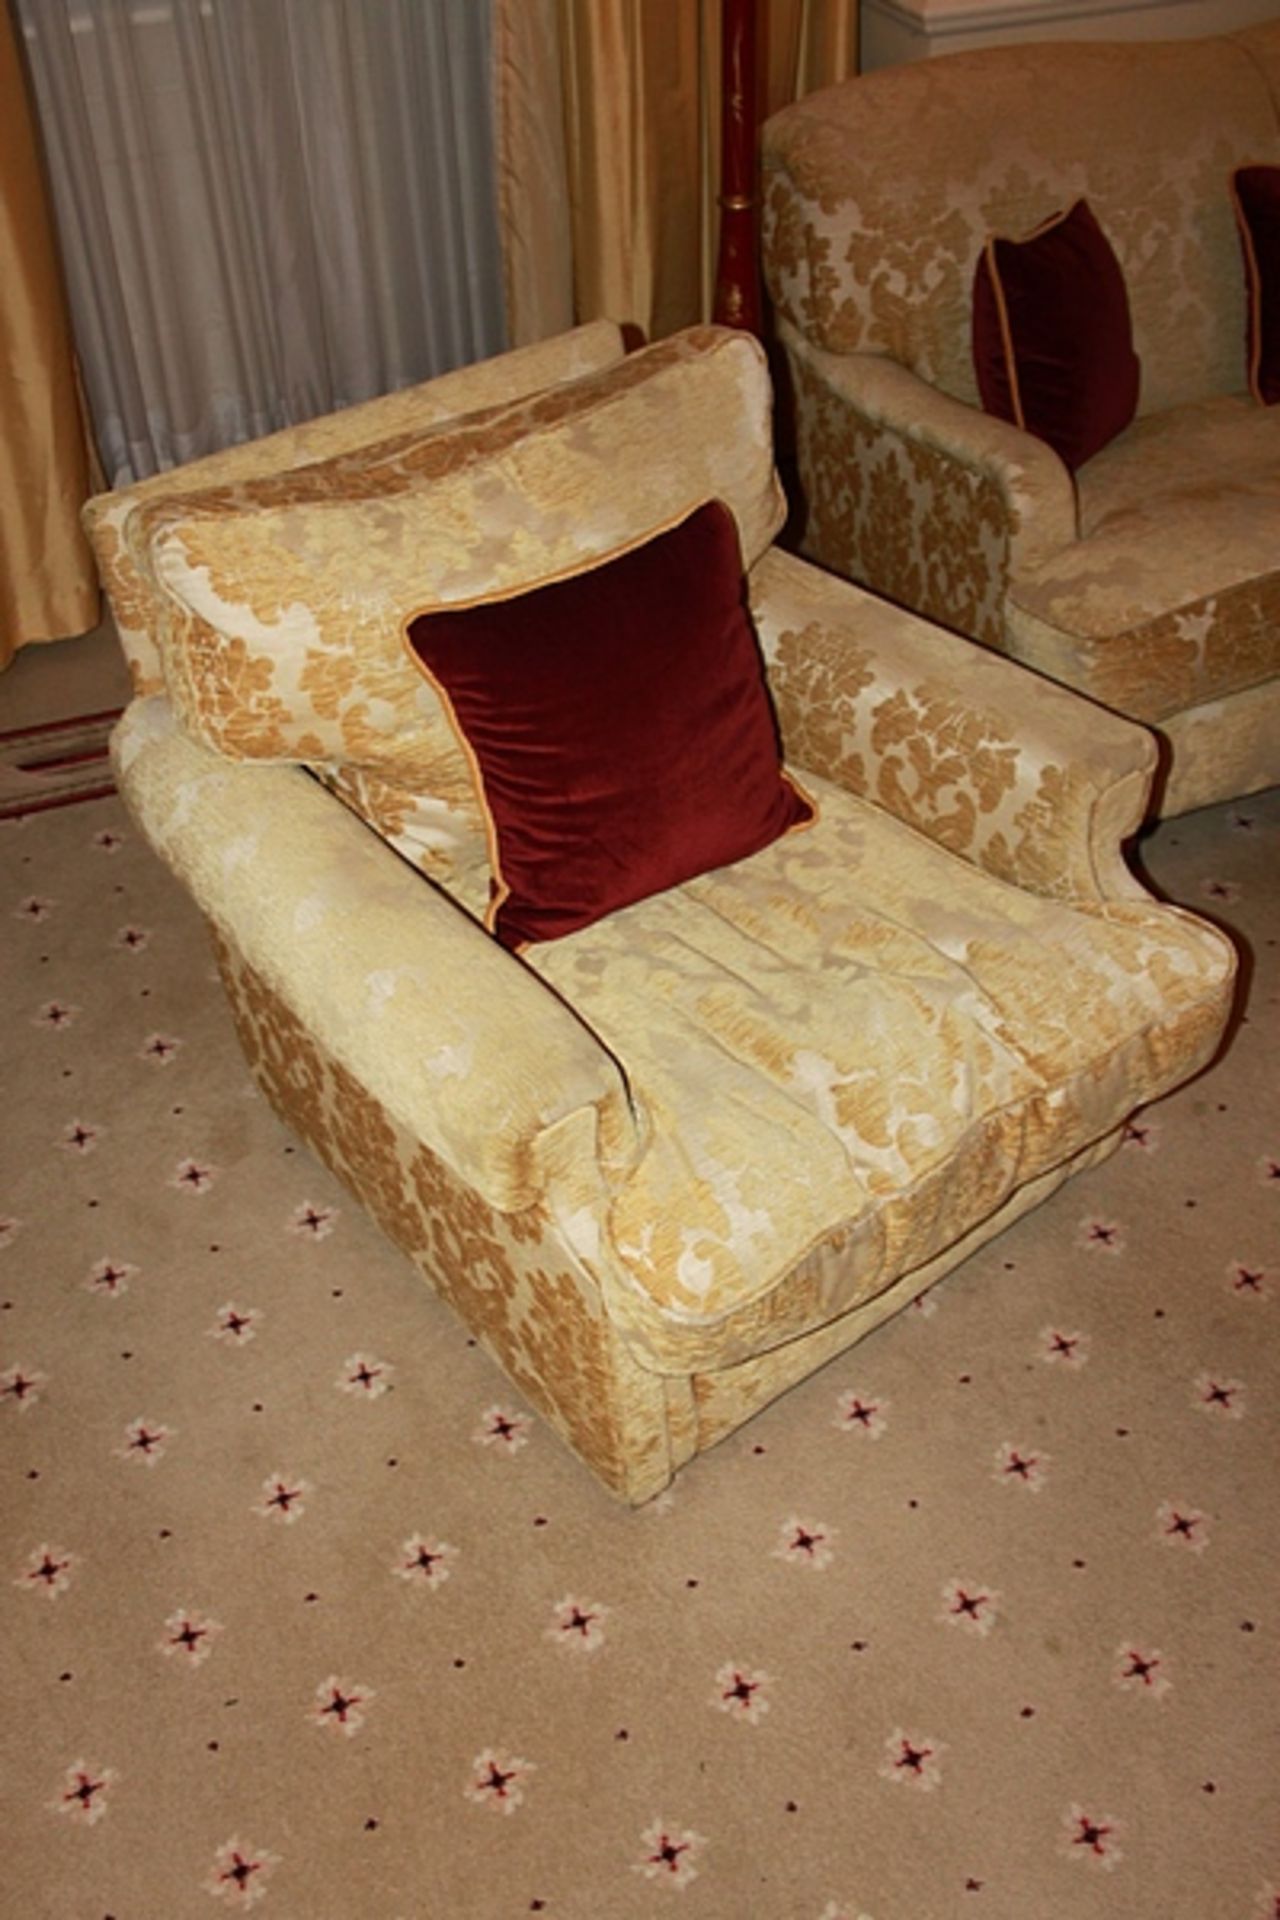 A traditional easy armchair upholstered in a gold broccade fabric mounted on solid legs 800mm x